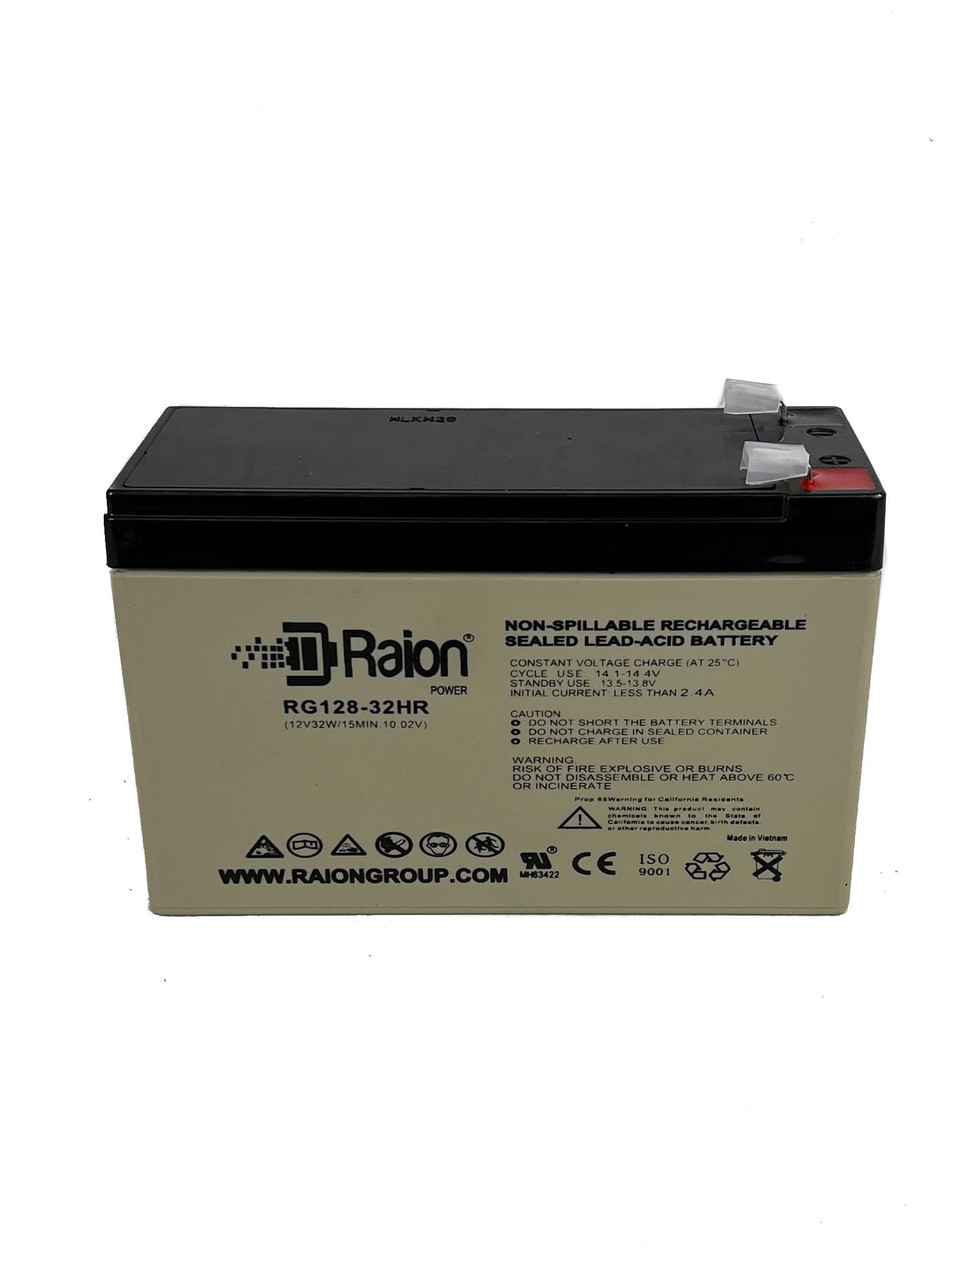 Raion Power RG128-32HR Replacement High Rate Battery Cartridge for APC BACKUPS BK400